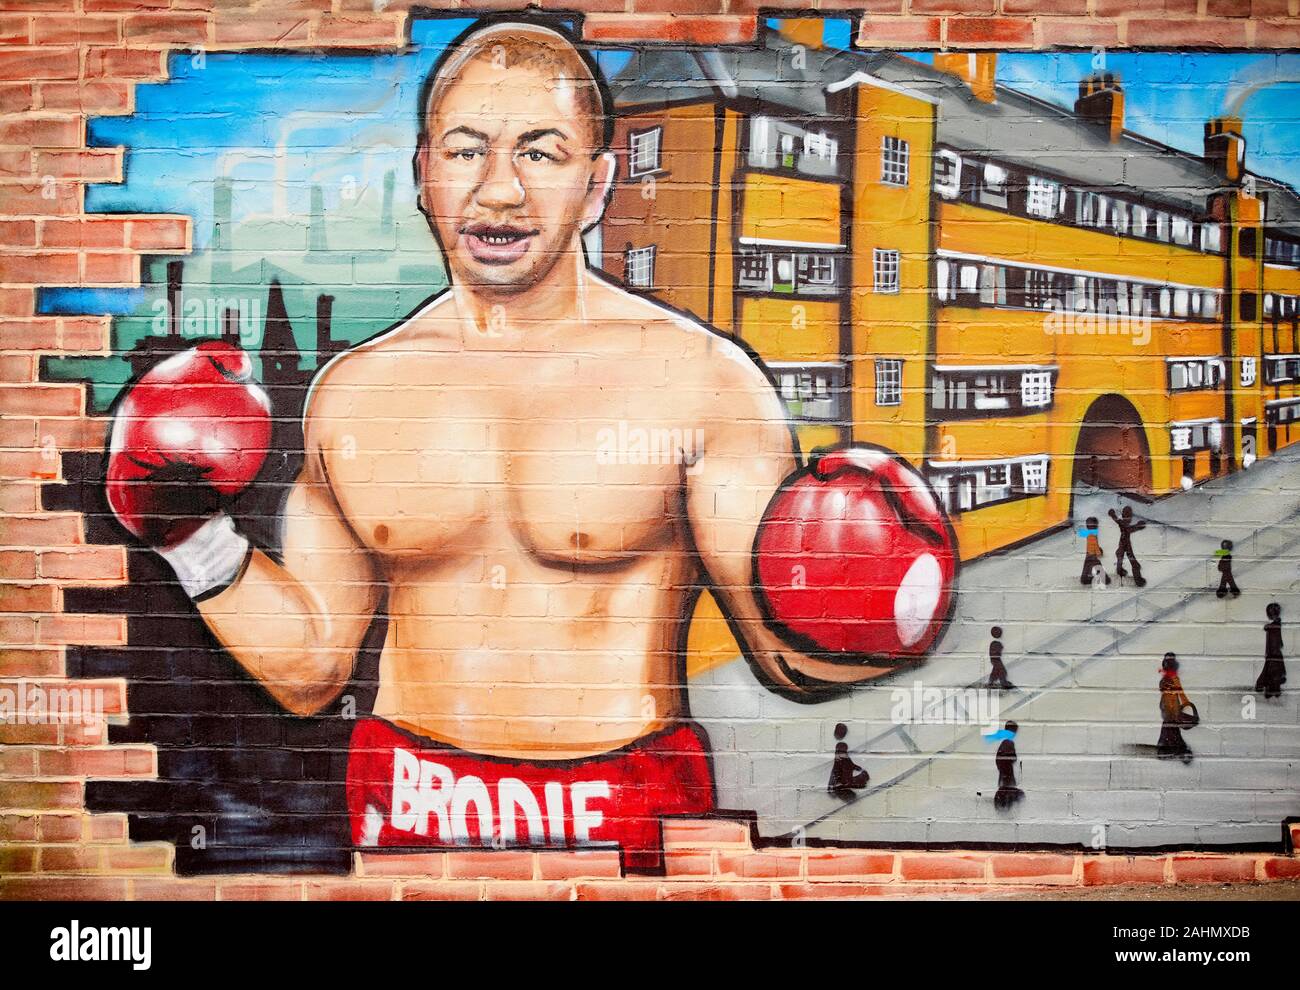 Manchester artist Kelzo large mural in Collyhurst depicting some of the areas history. Boxer Michael Brodie Stock Photo